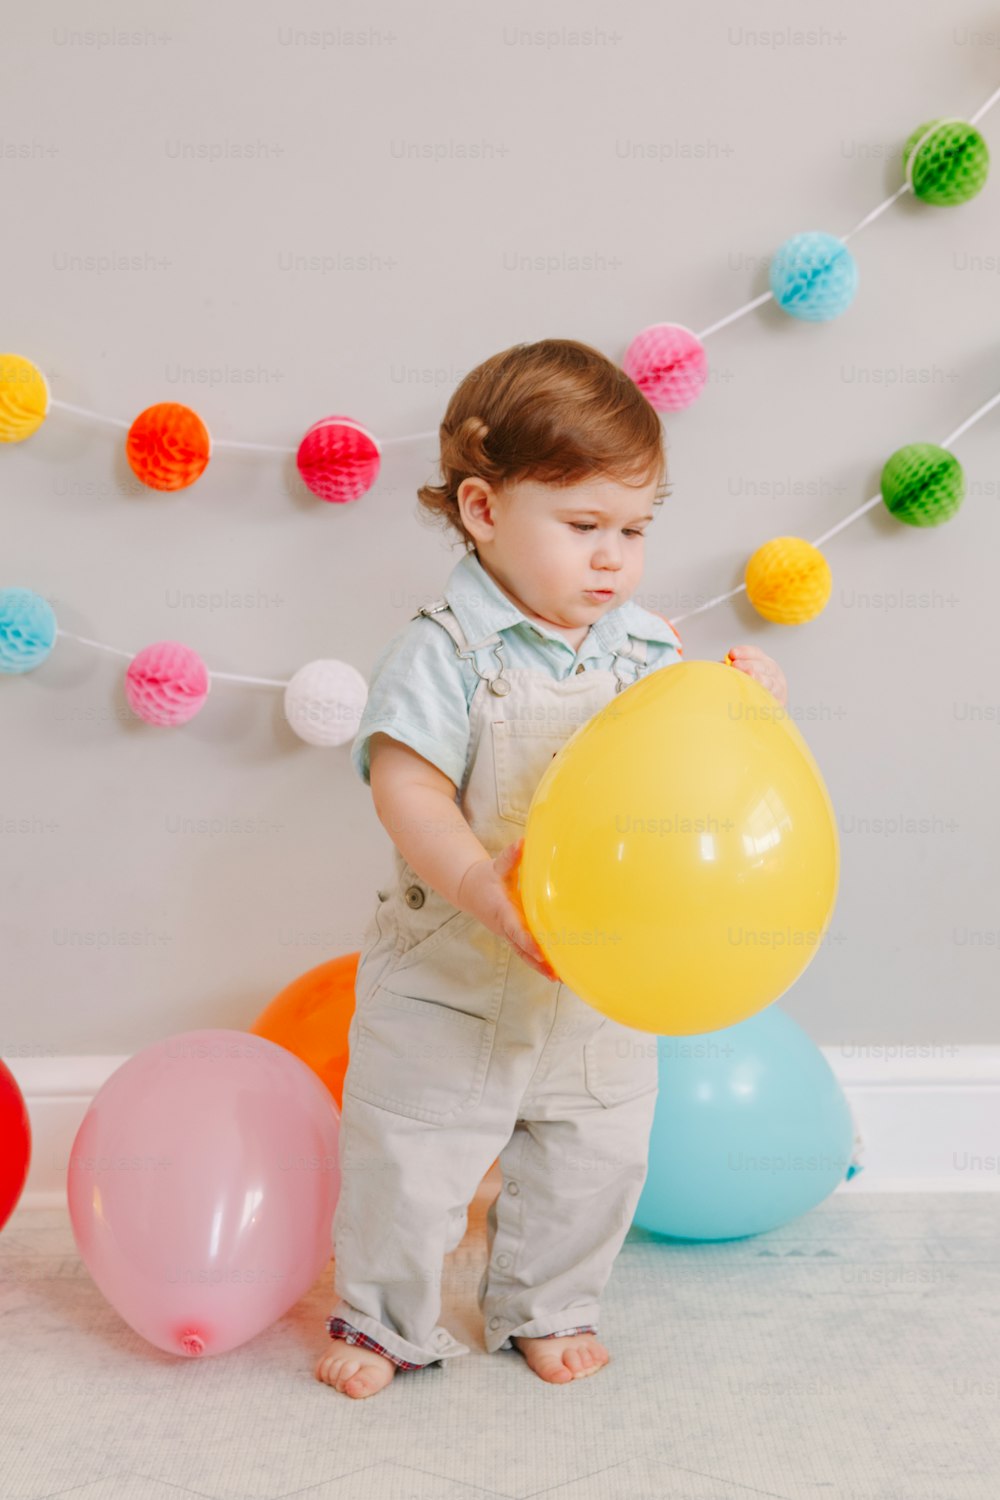 Funny Caucasian baby boy celebrating his first birthday. Excited child kid toddler playing with colorful balloons. Celebration of event or party indoors at home. Happy birthday lifestyle concept.